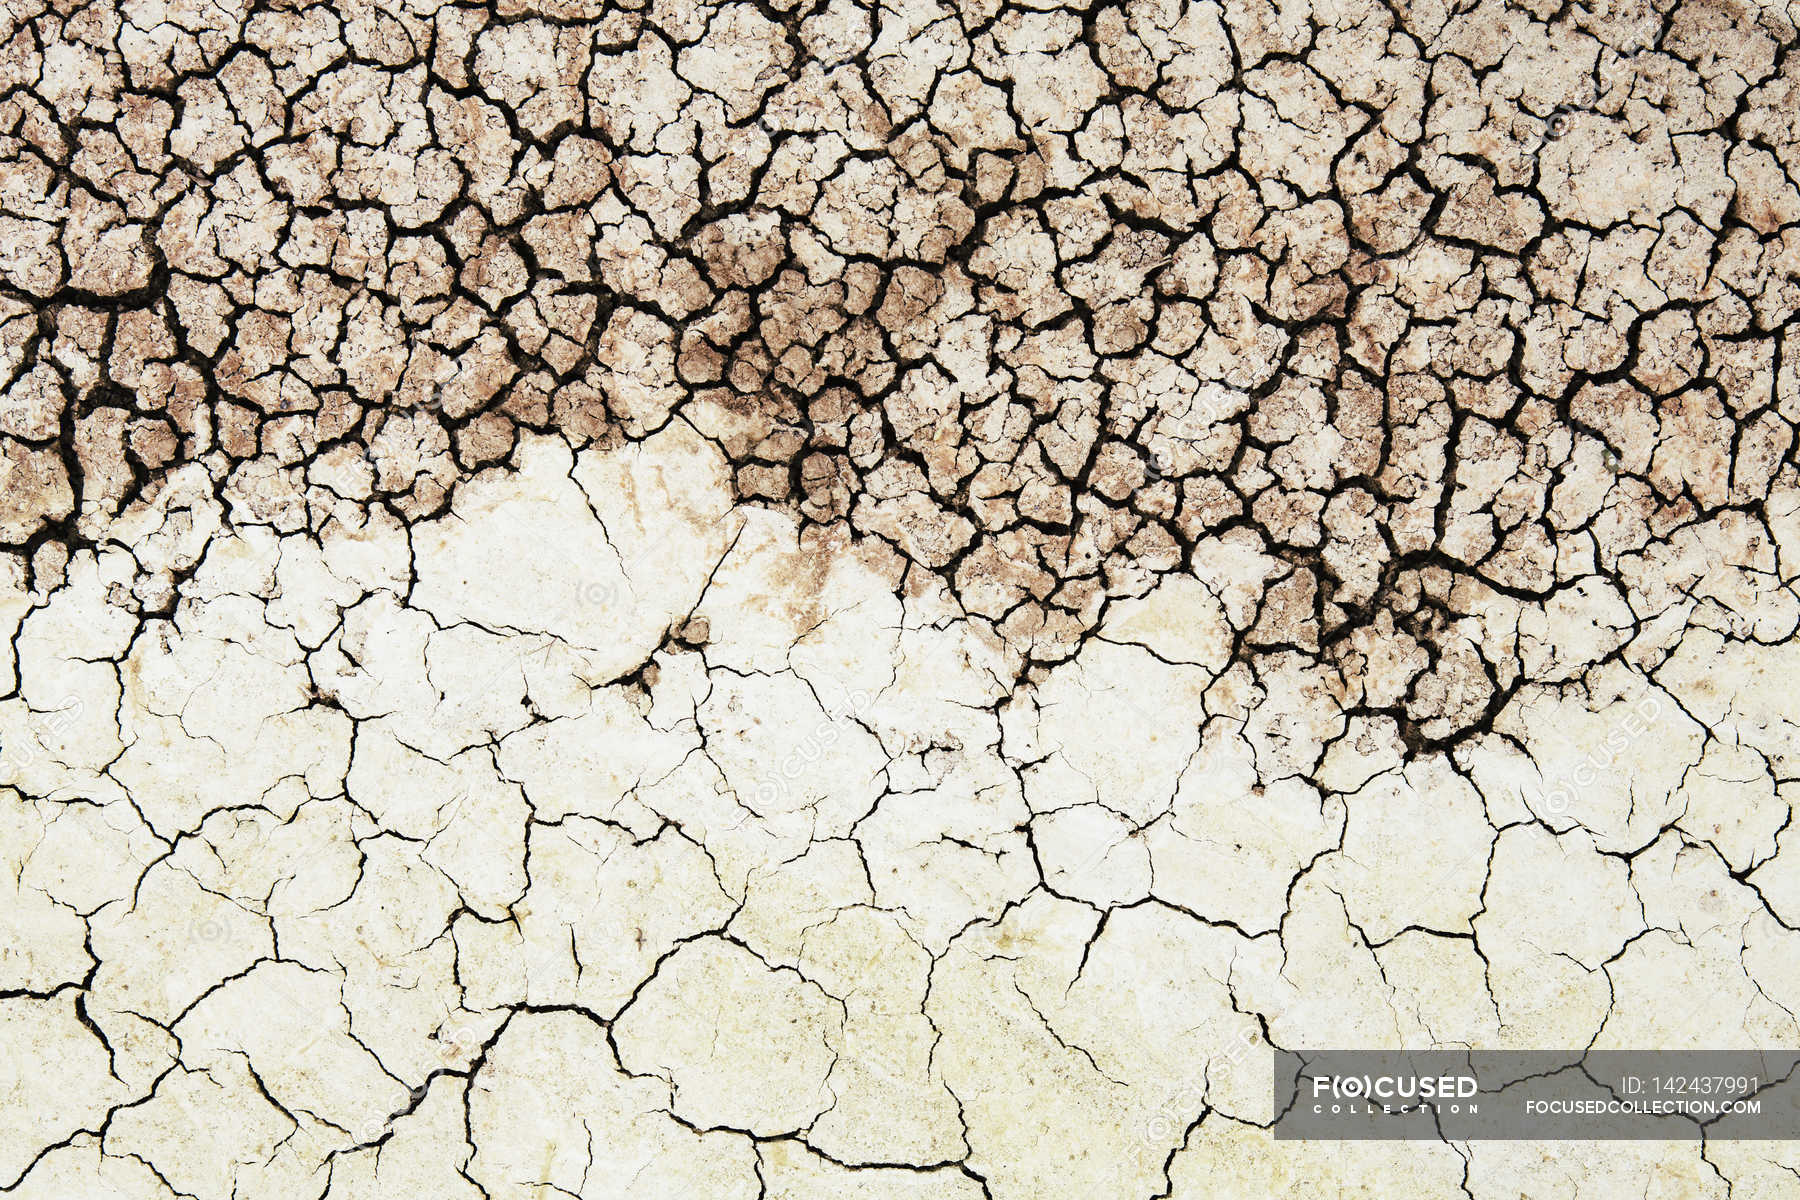 Cracked parched soil surface — Stock Photo | #142437991